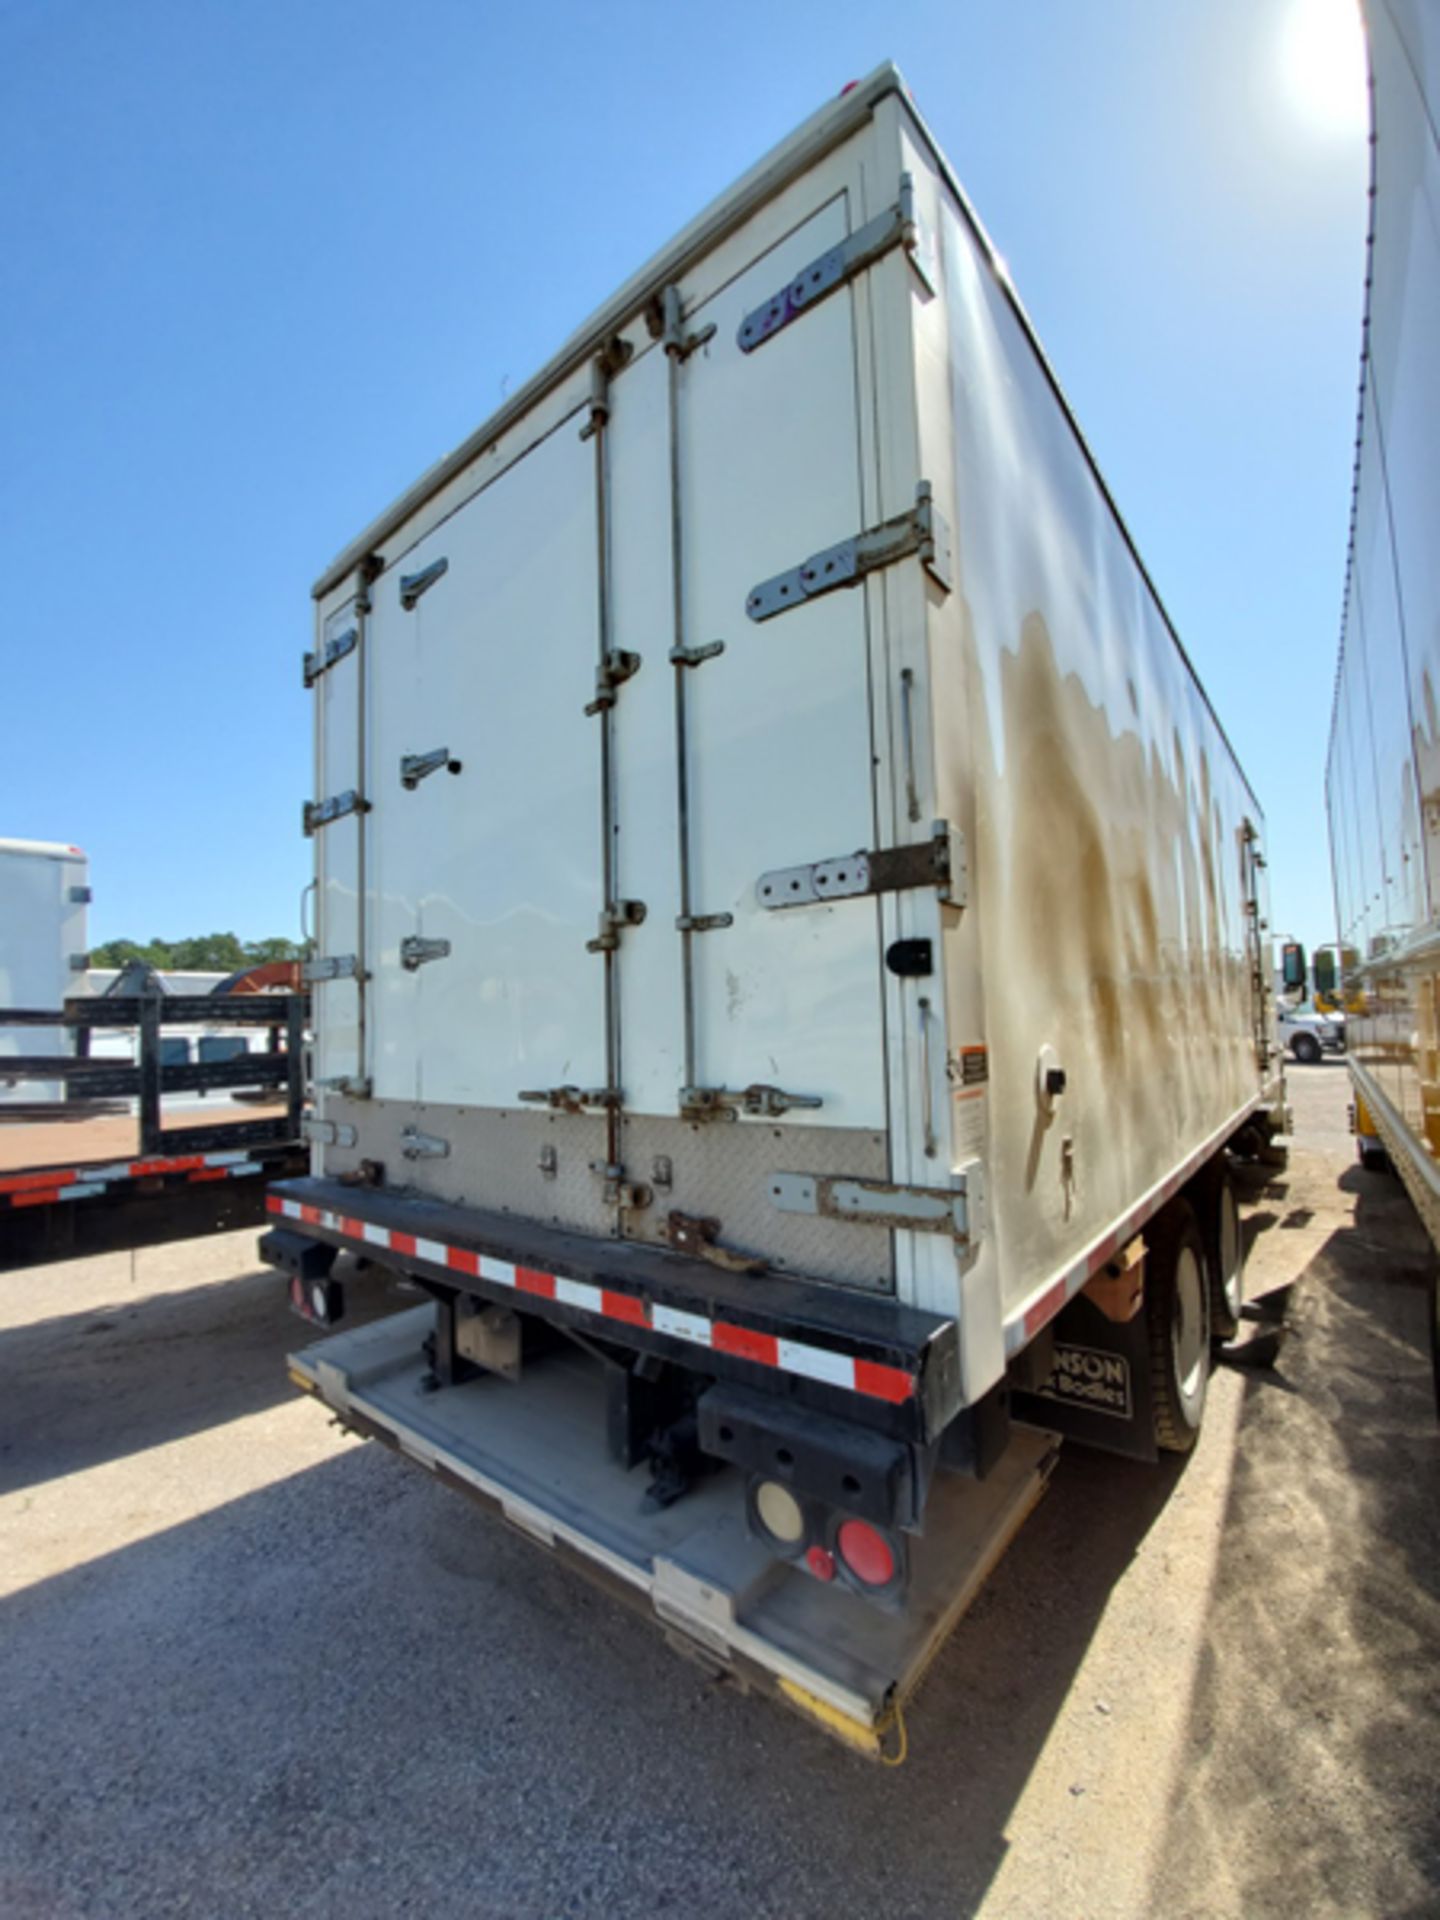 2018 INTERNATIONAL 4400 SBA 6X4 REFRIGERATED BOX TRUCK VIN#: 1HTMSTAR1JH049076, Approx Miles: 31564, - Image 4 of 9